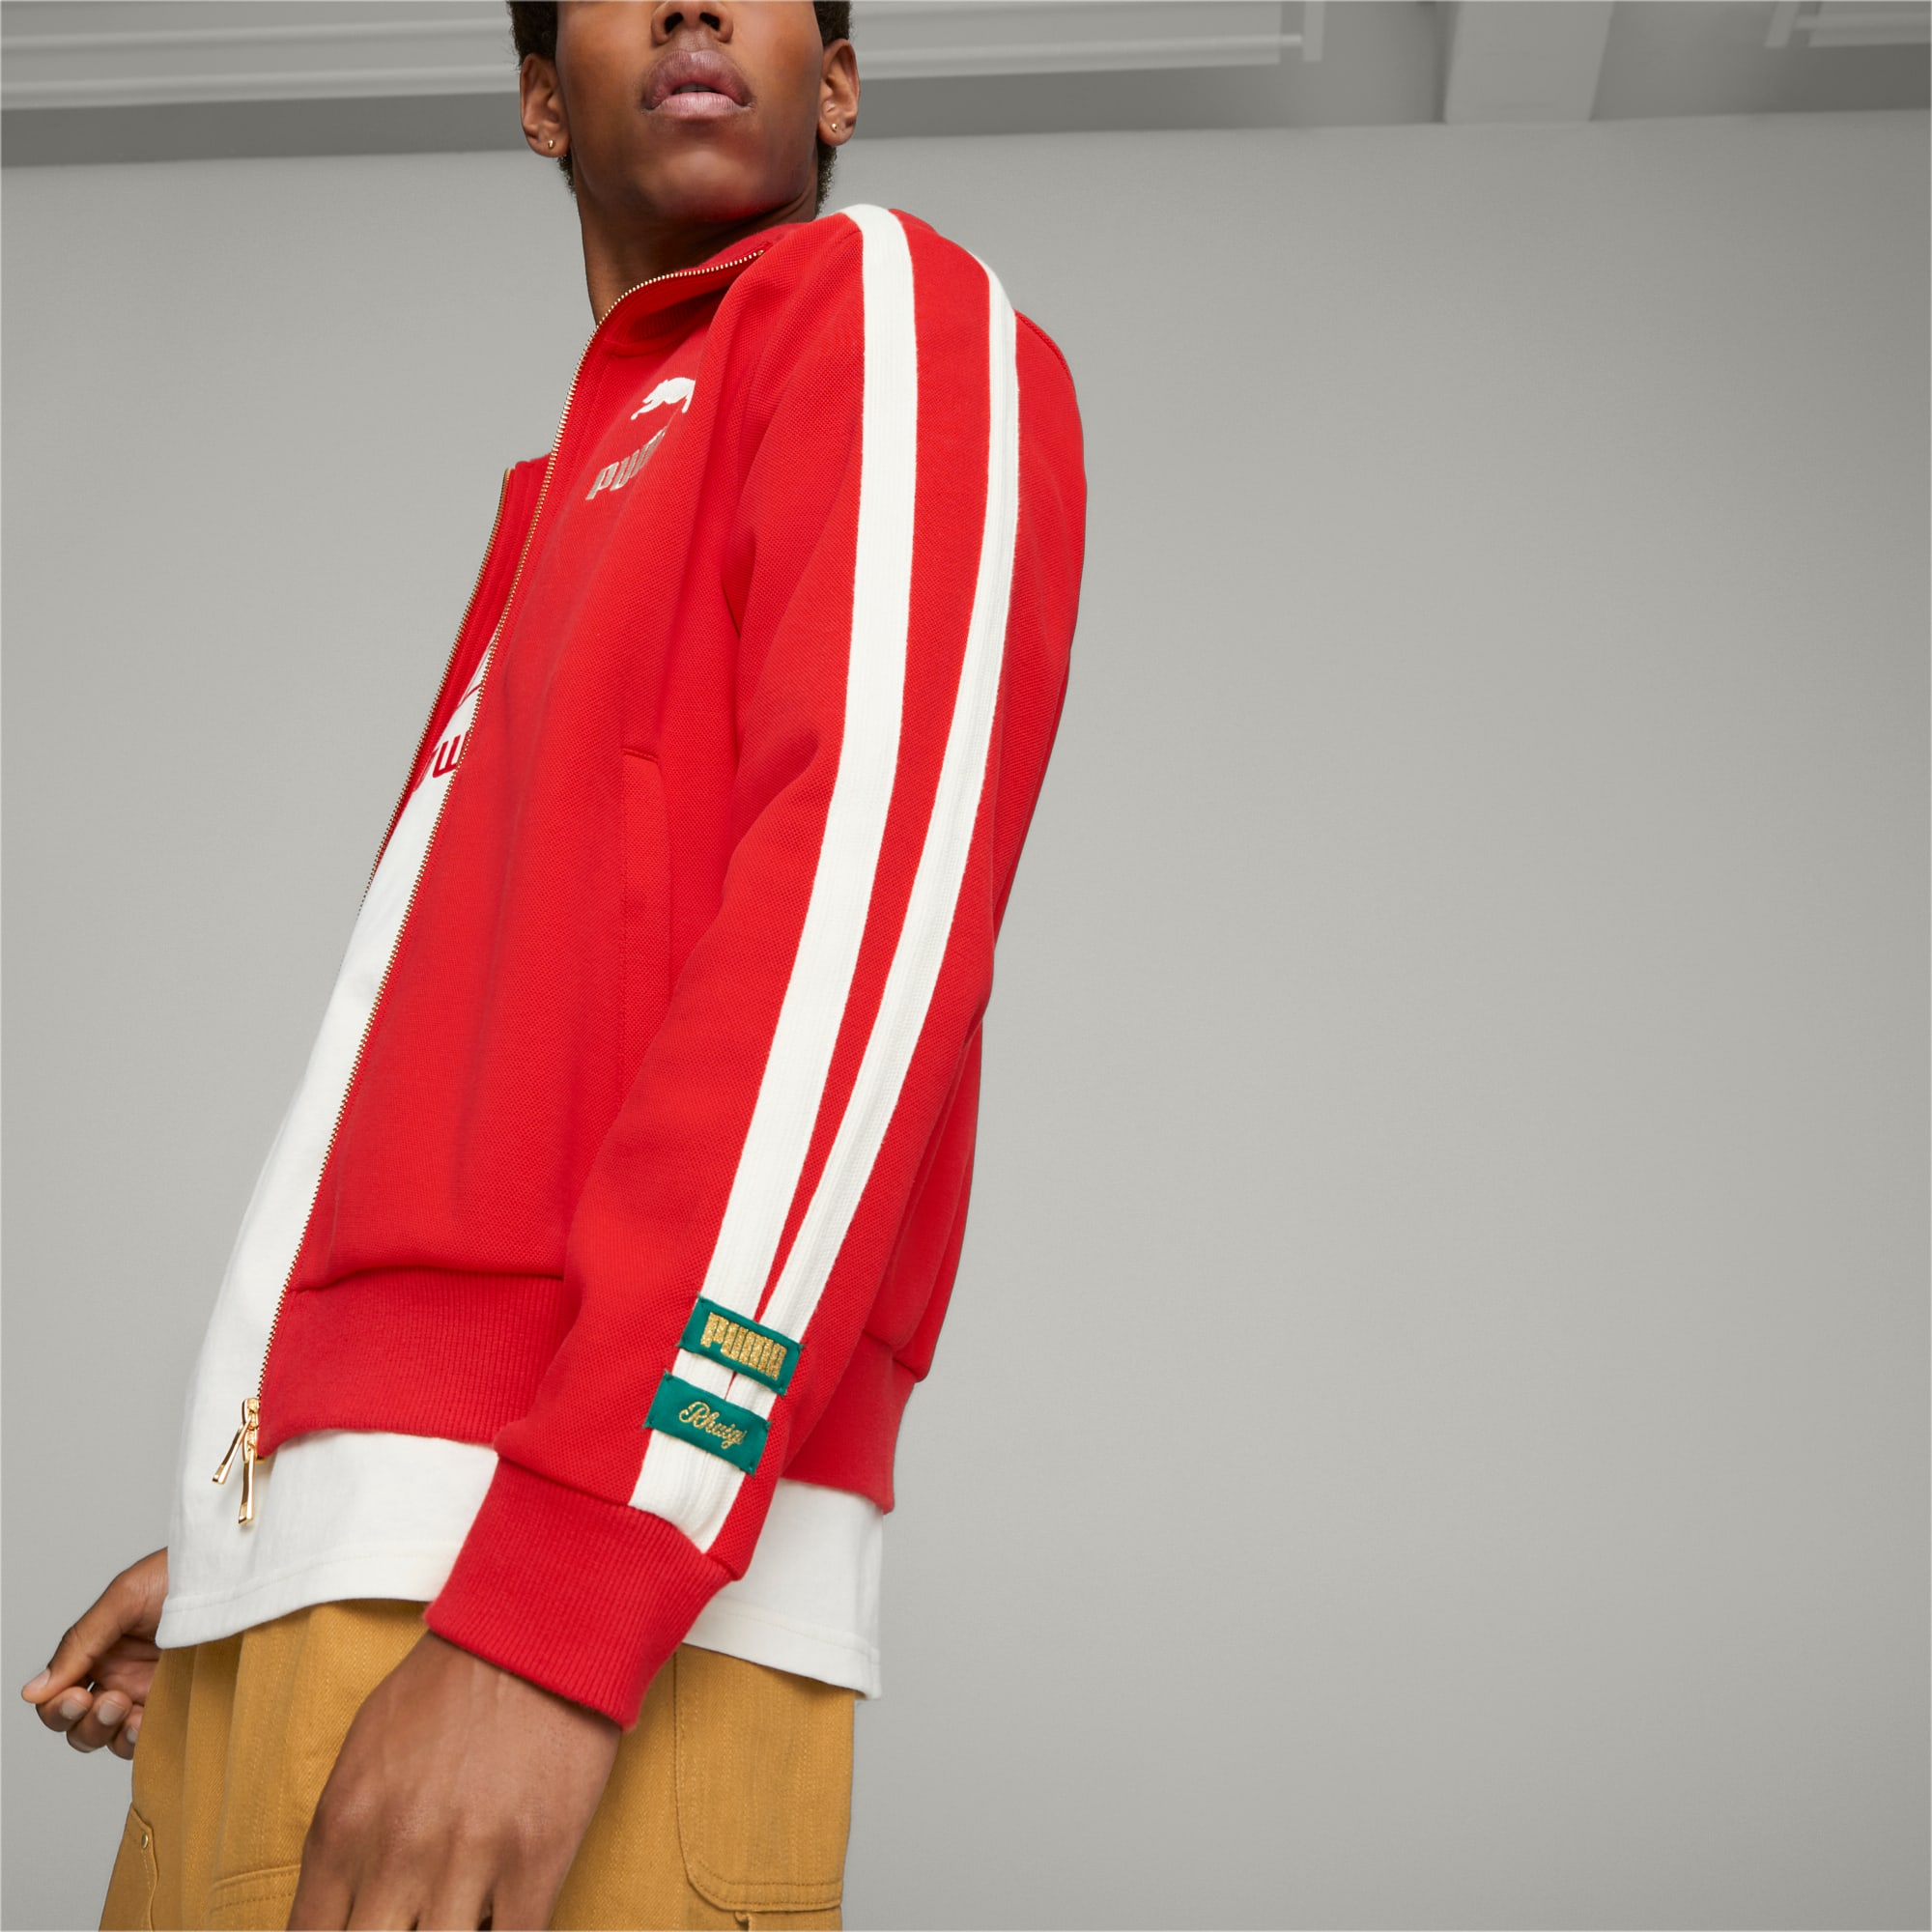 PUMA X Rhuigi T7 Track Top Men's Jacket, For All Time Red, Size XS, Clothing